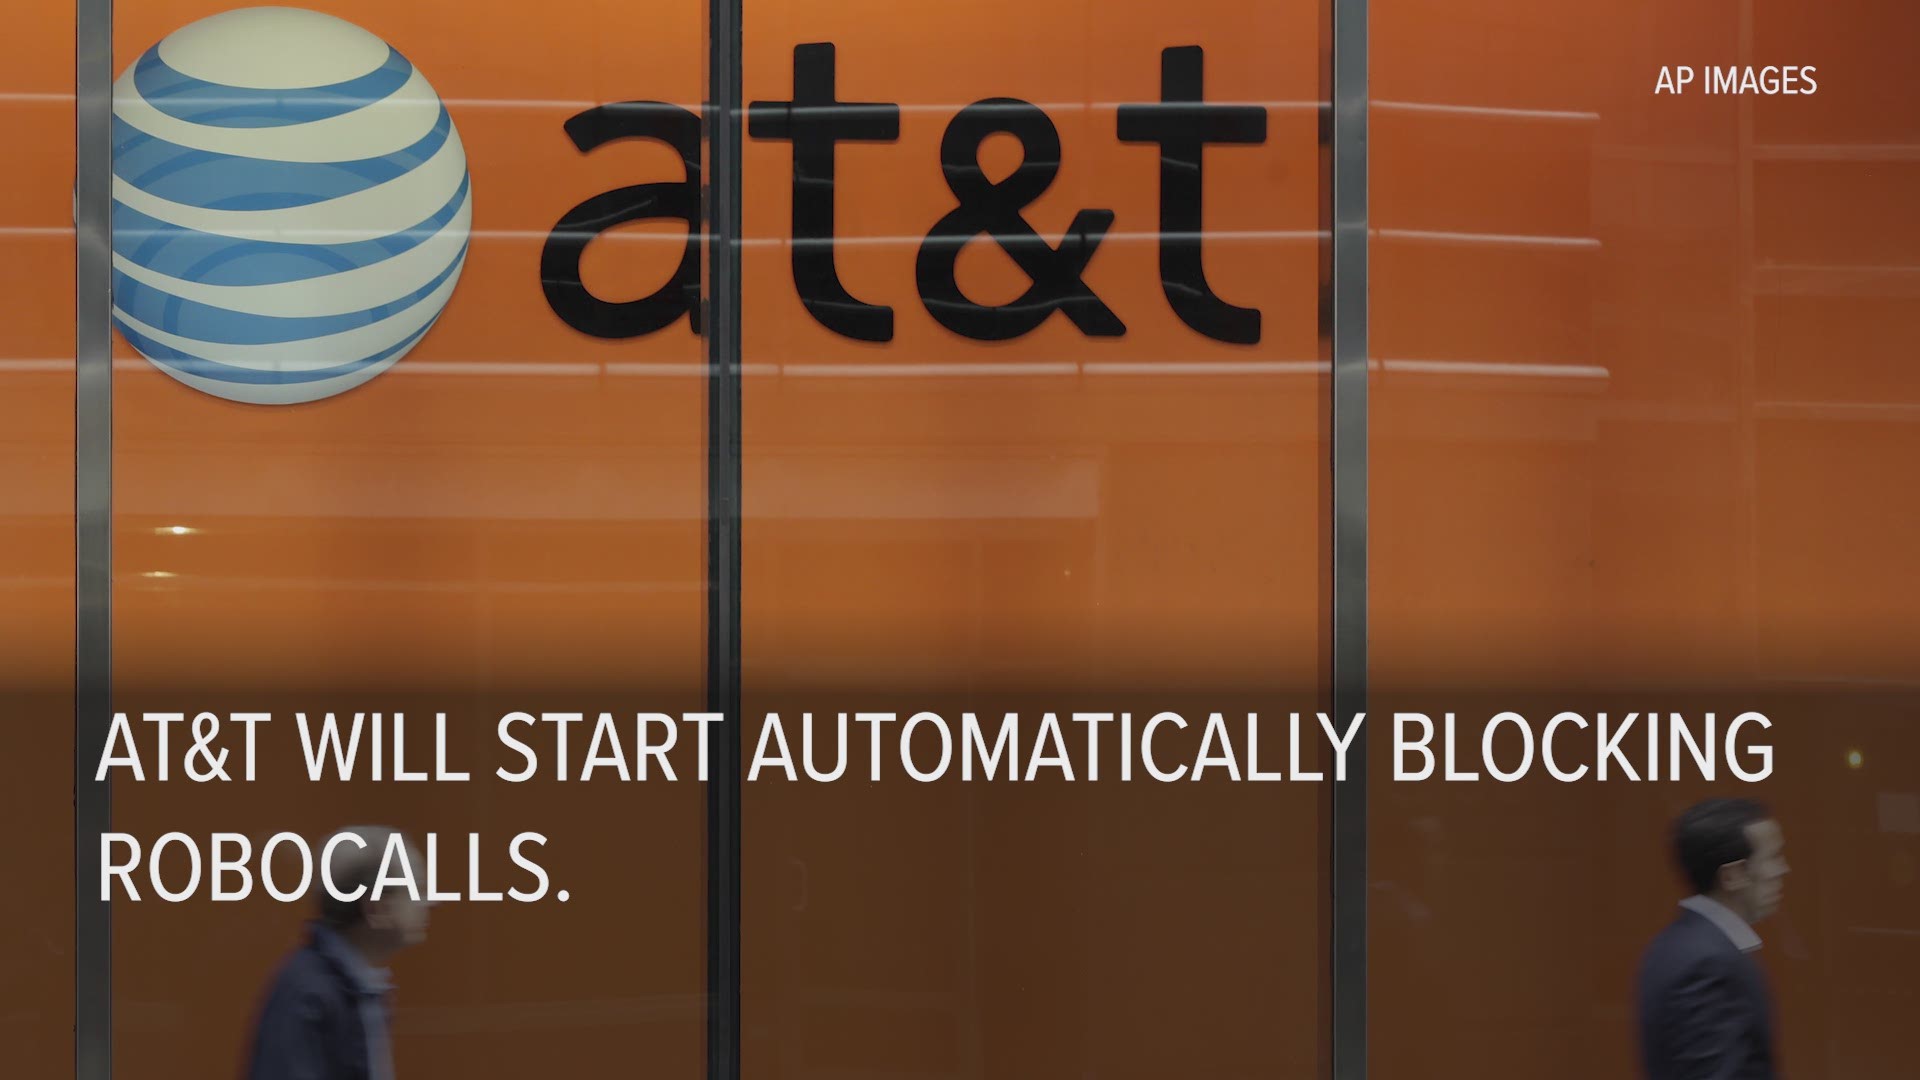 AT&T is the first wireless company to start blocking robocalls automatically.